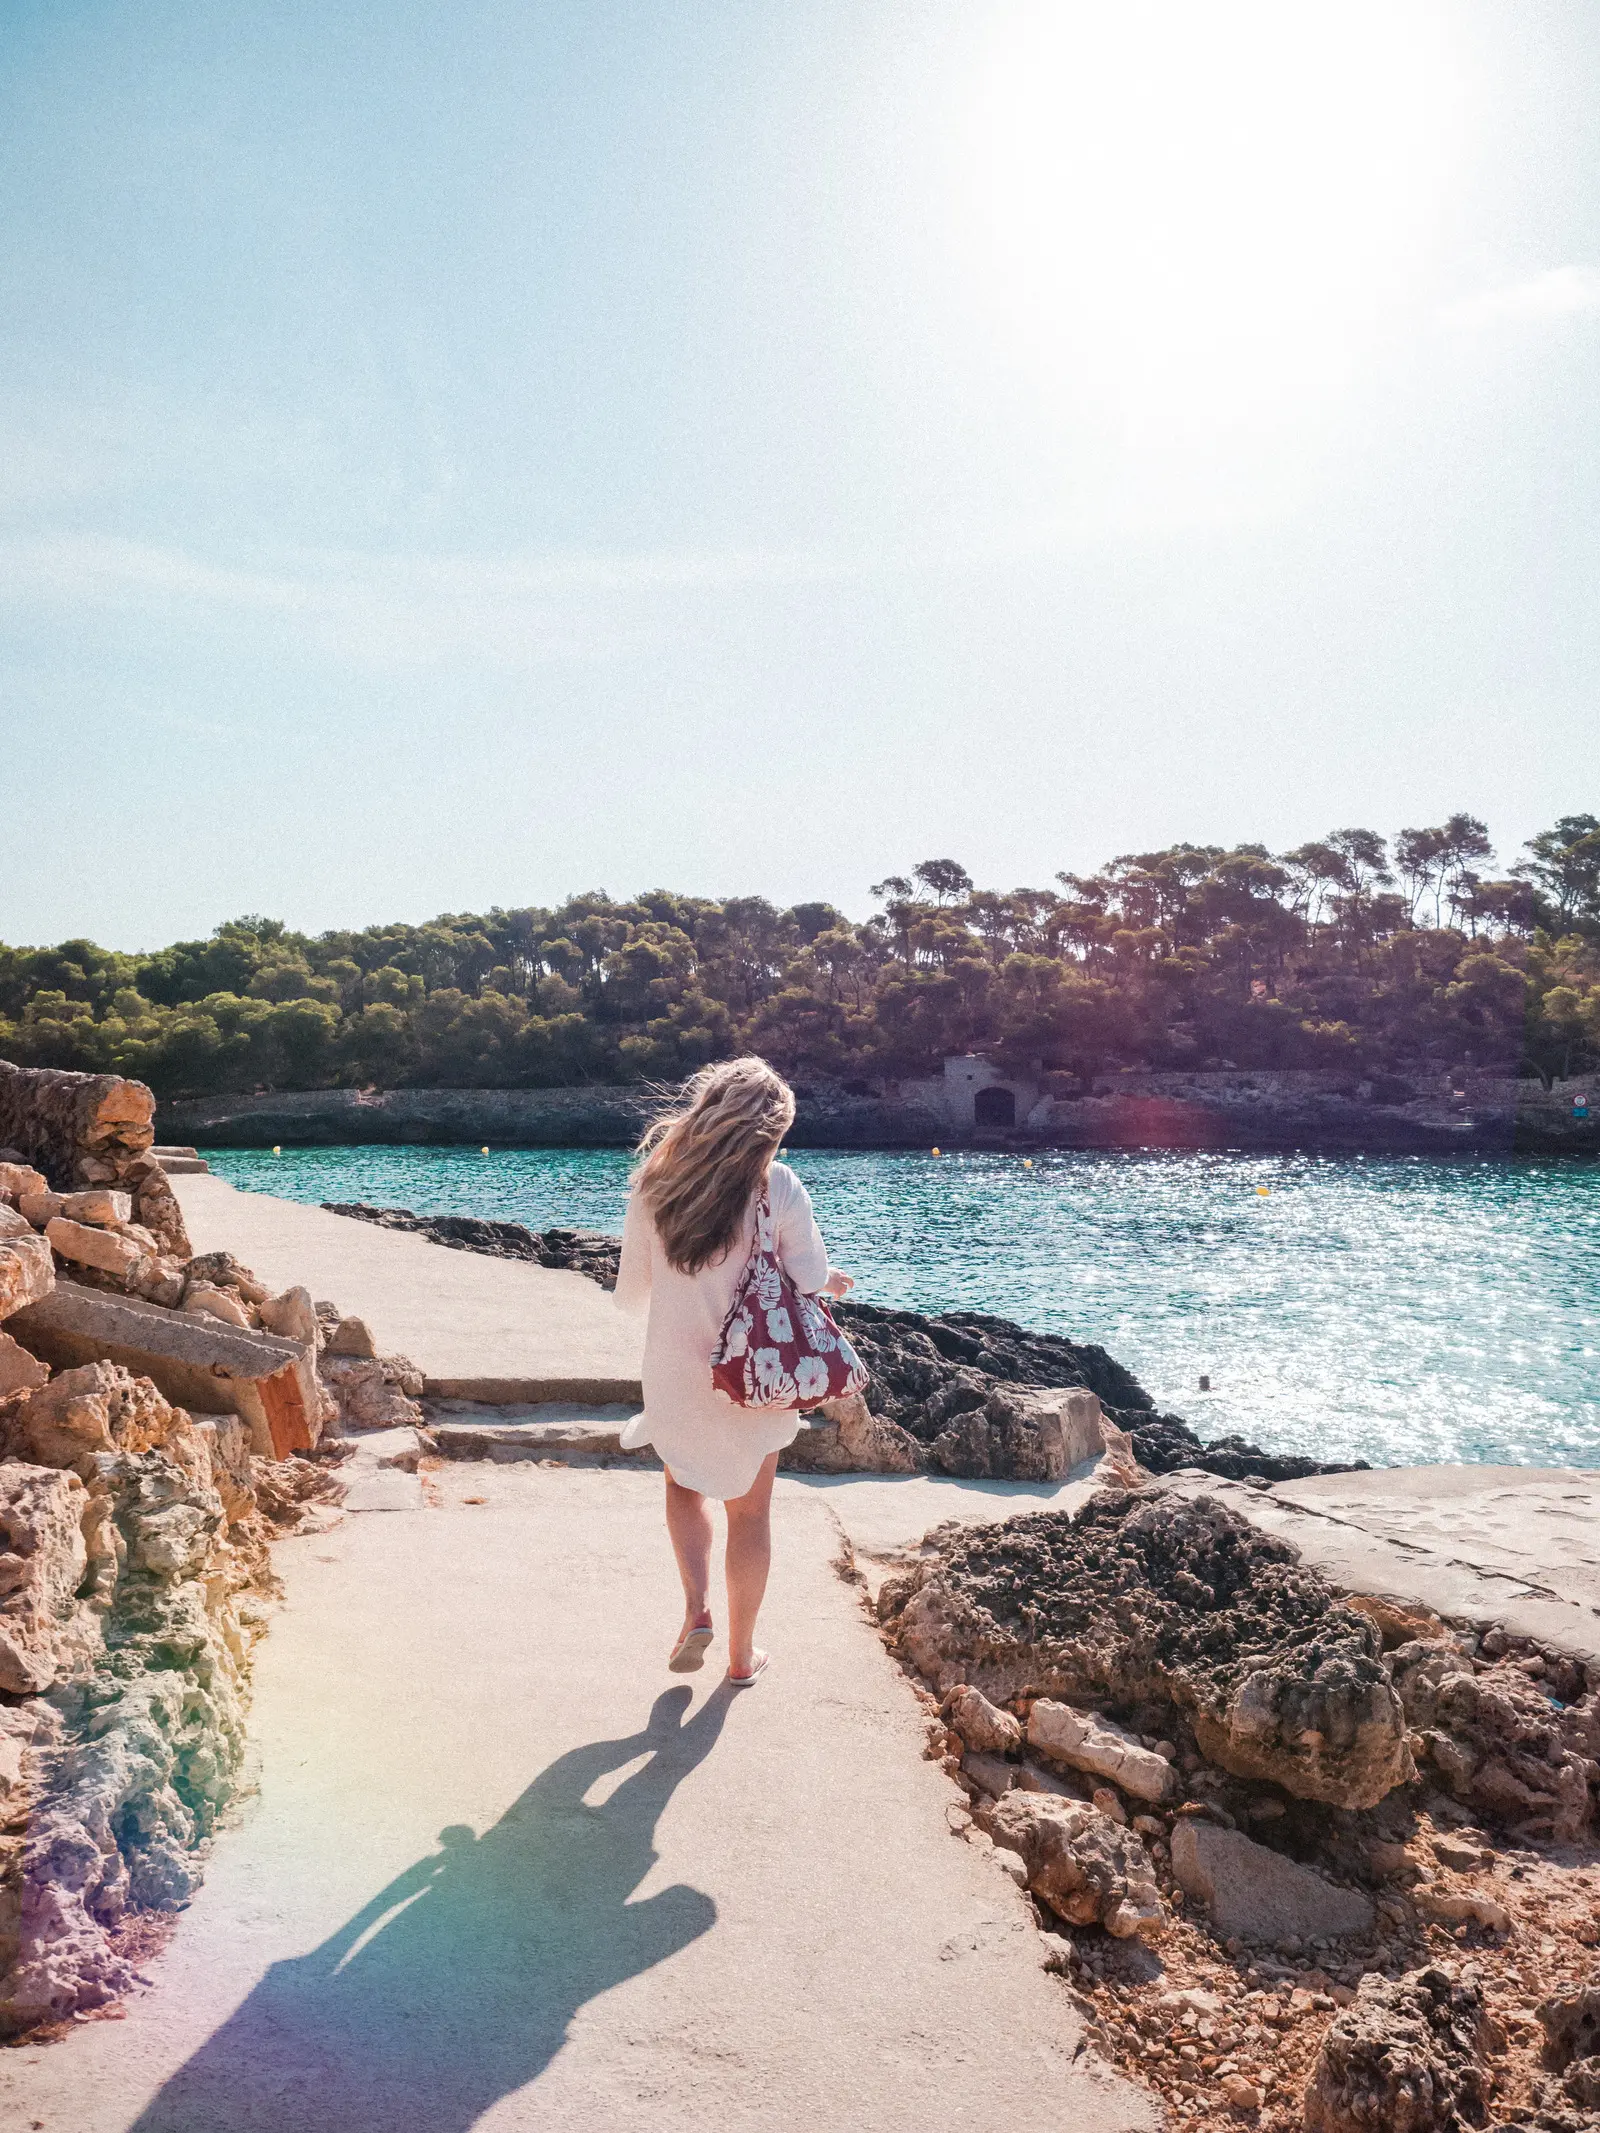 Woman in a white dress, carrying a burgundy bag, walking along a path next to turquoise water in Cala Mondrago Mallorca.